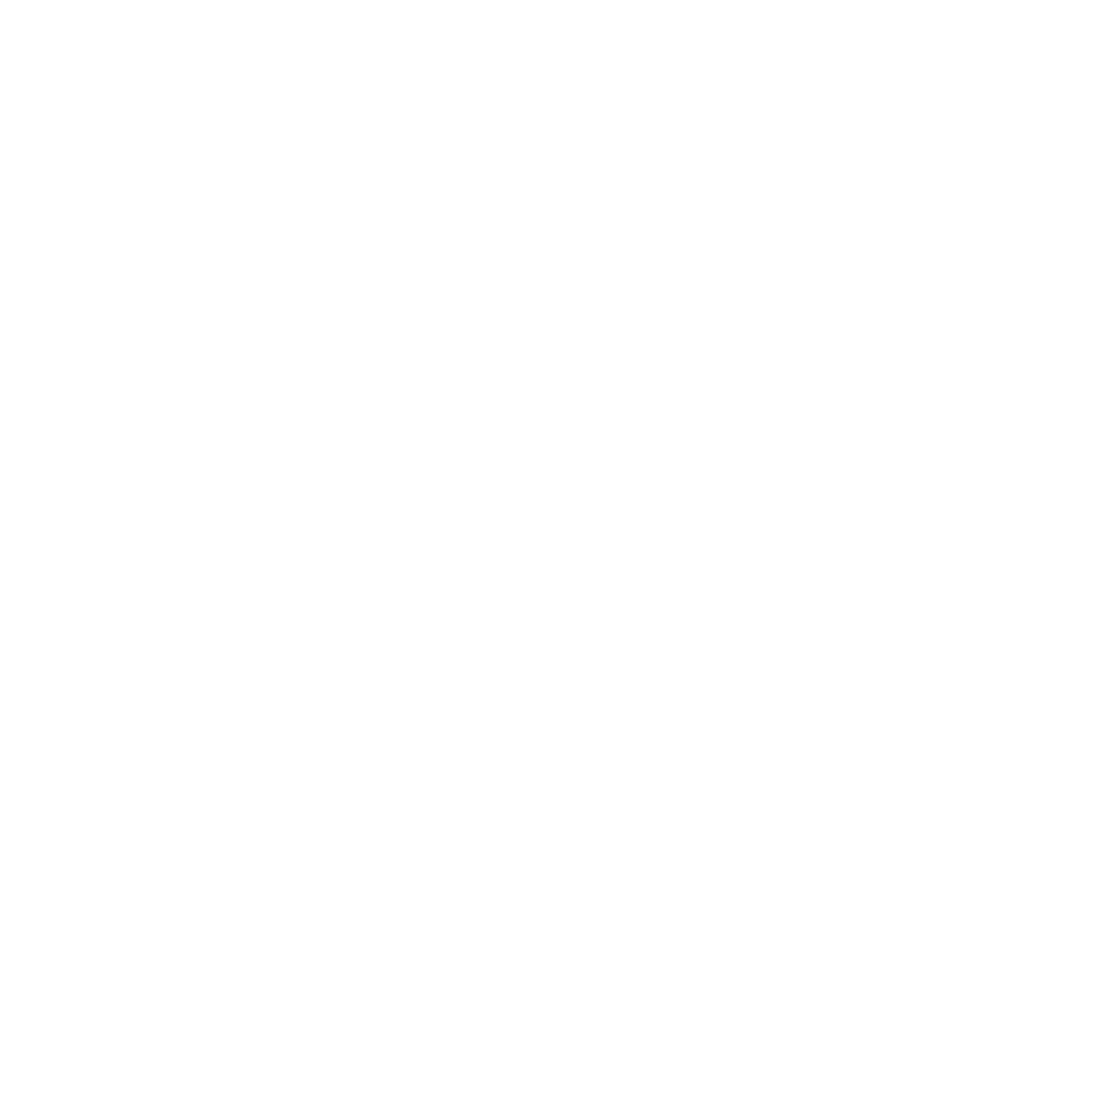 In a Circle with a Black B Logo - Index | Access Bookings